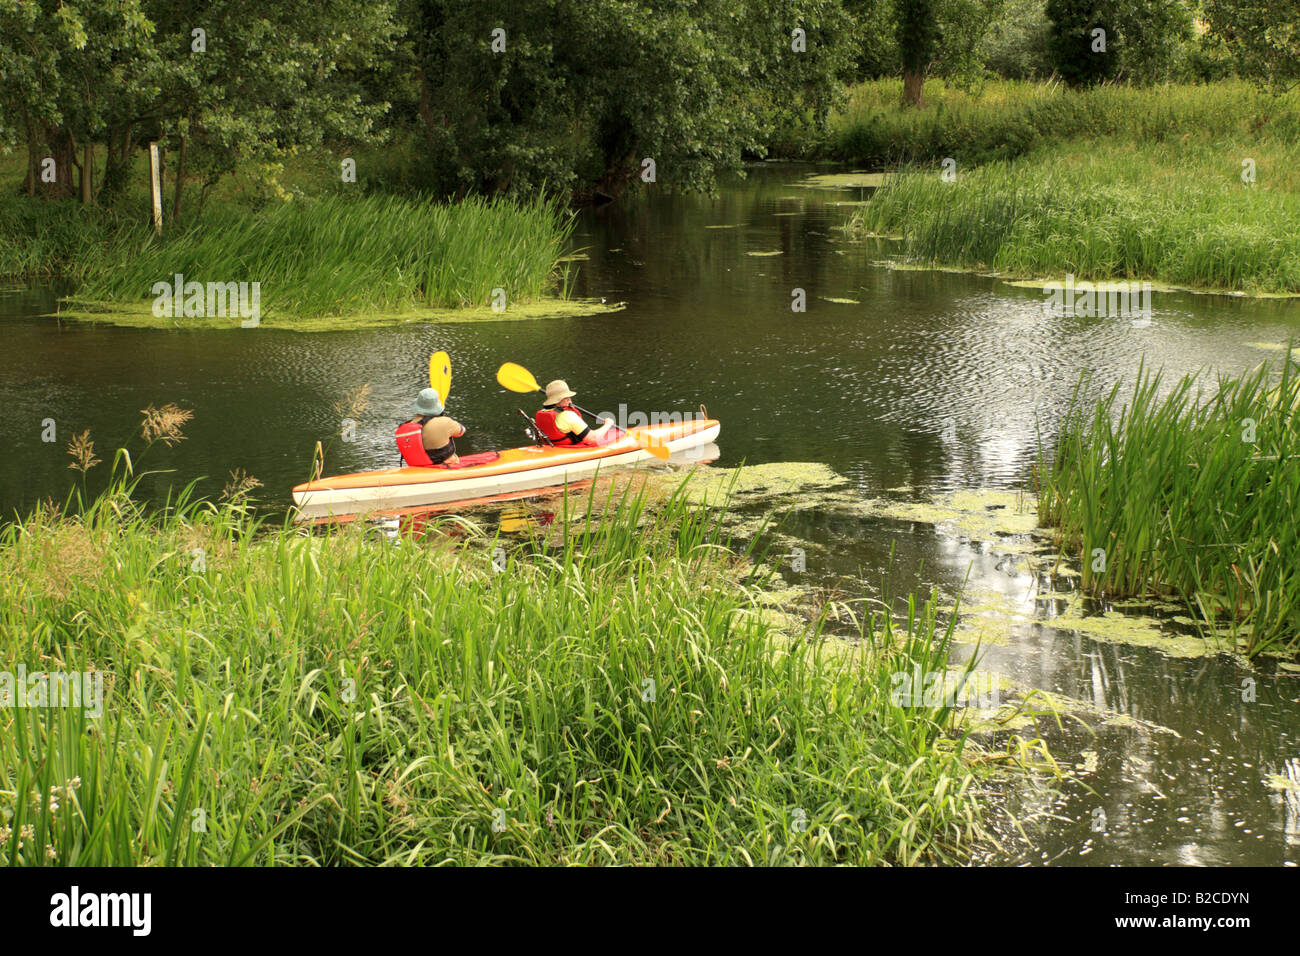 https://c8.alamy.com/comp/B2CDYN/two-canoeists-paddle-out-into-a-tranquil-pool-surrounded-by-trees-B2CDYN.jpg